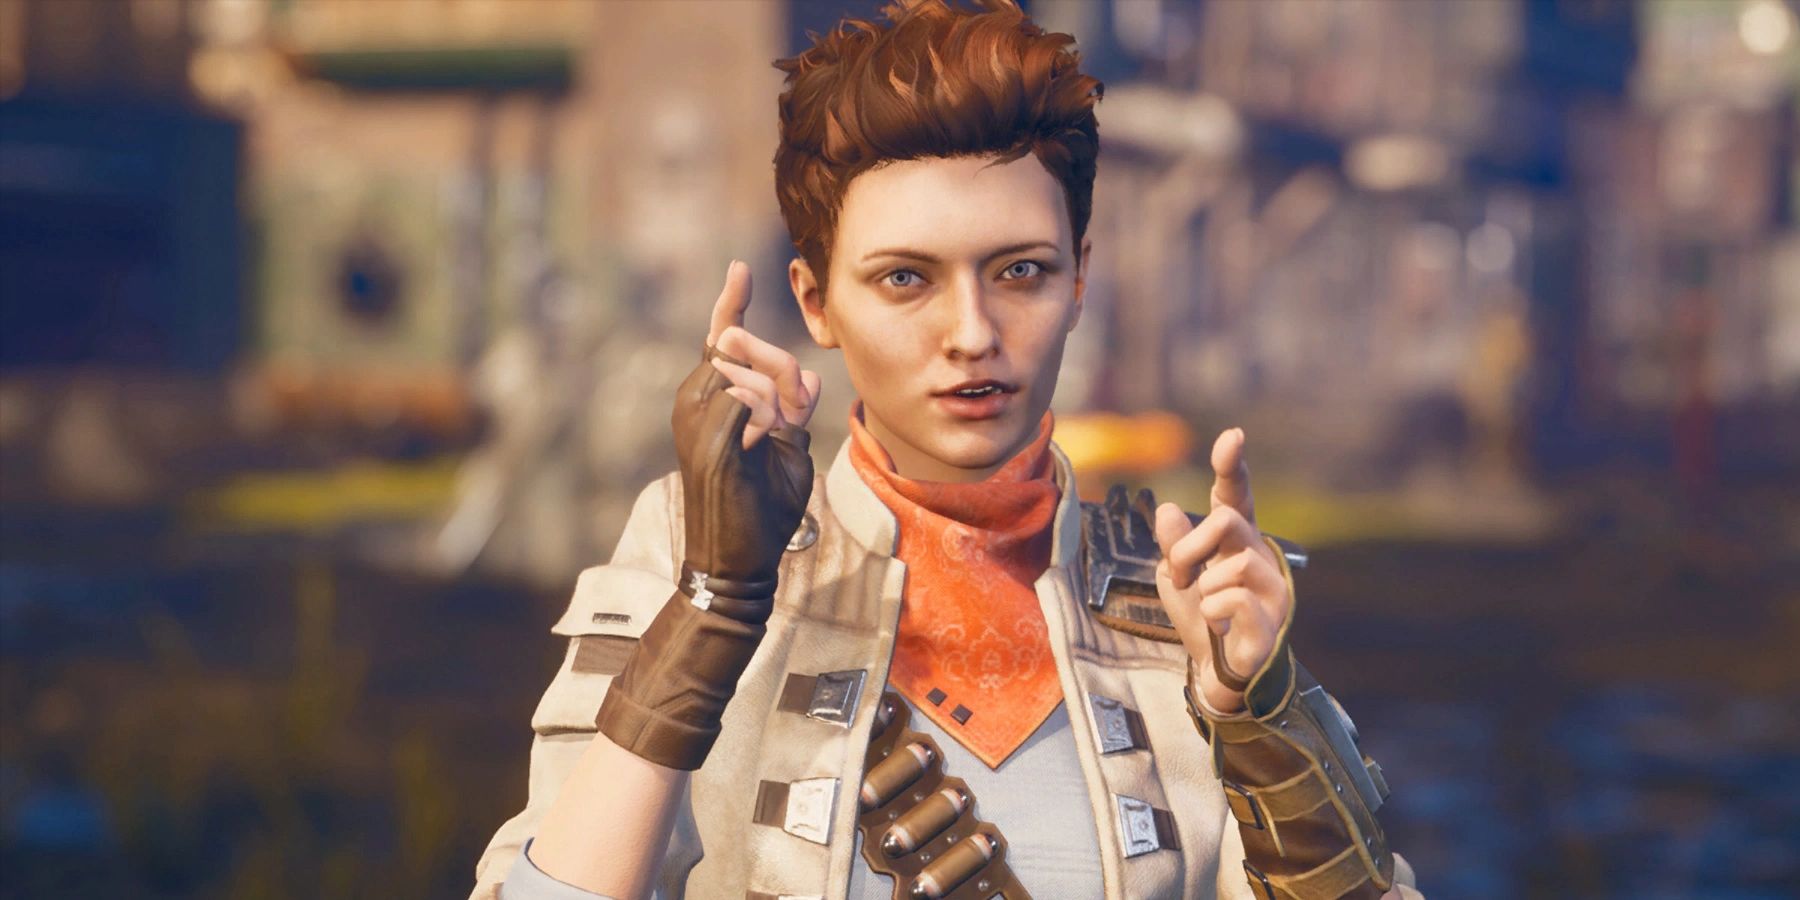 The Outer Worlds Ellie Companion